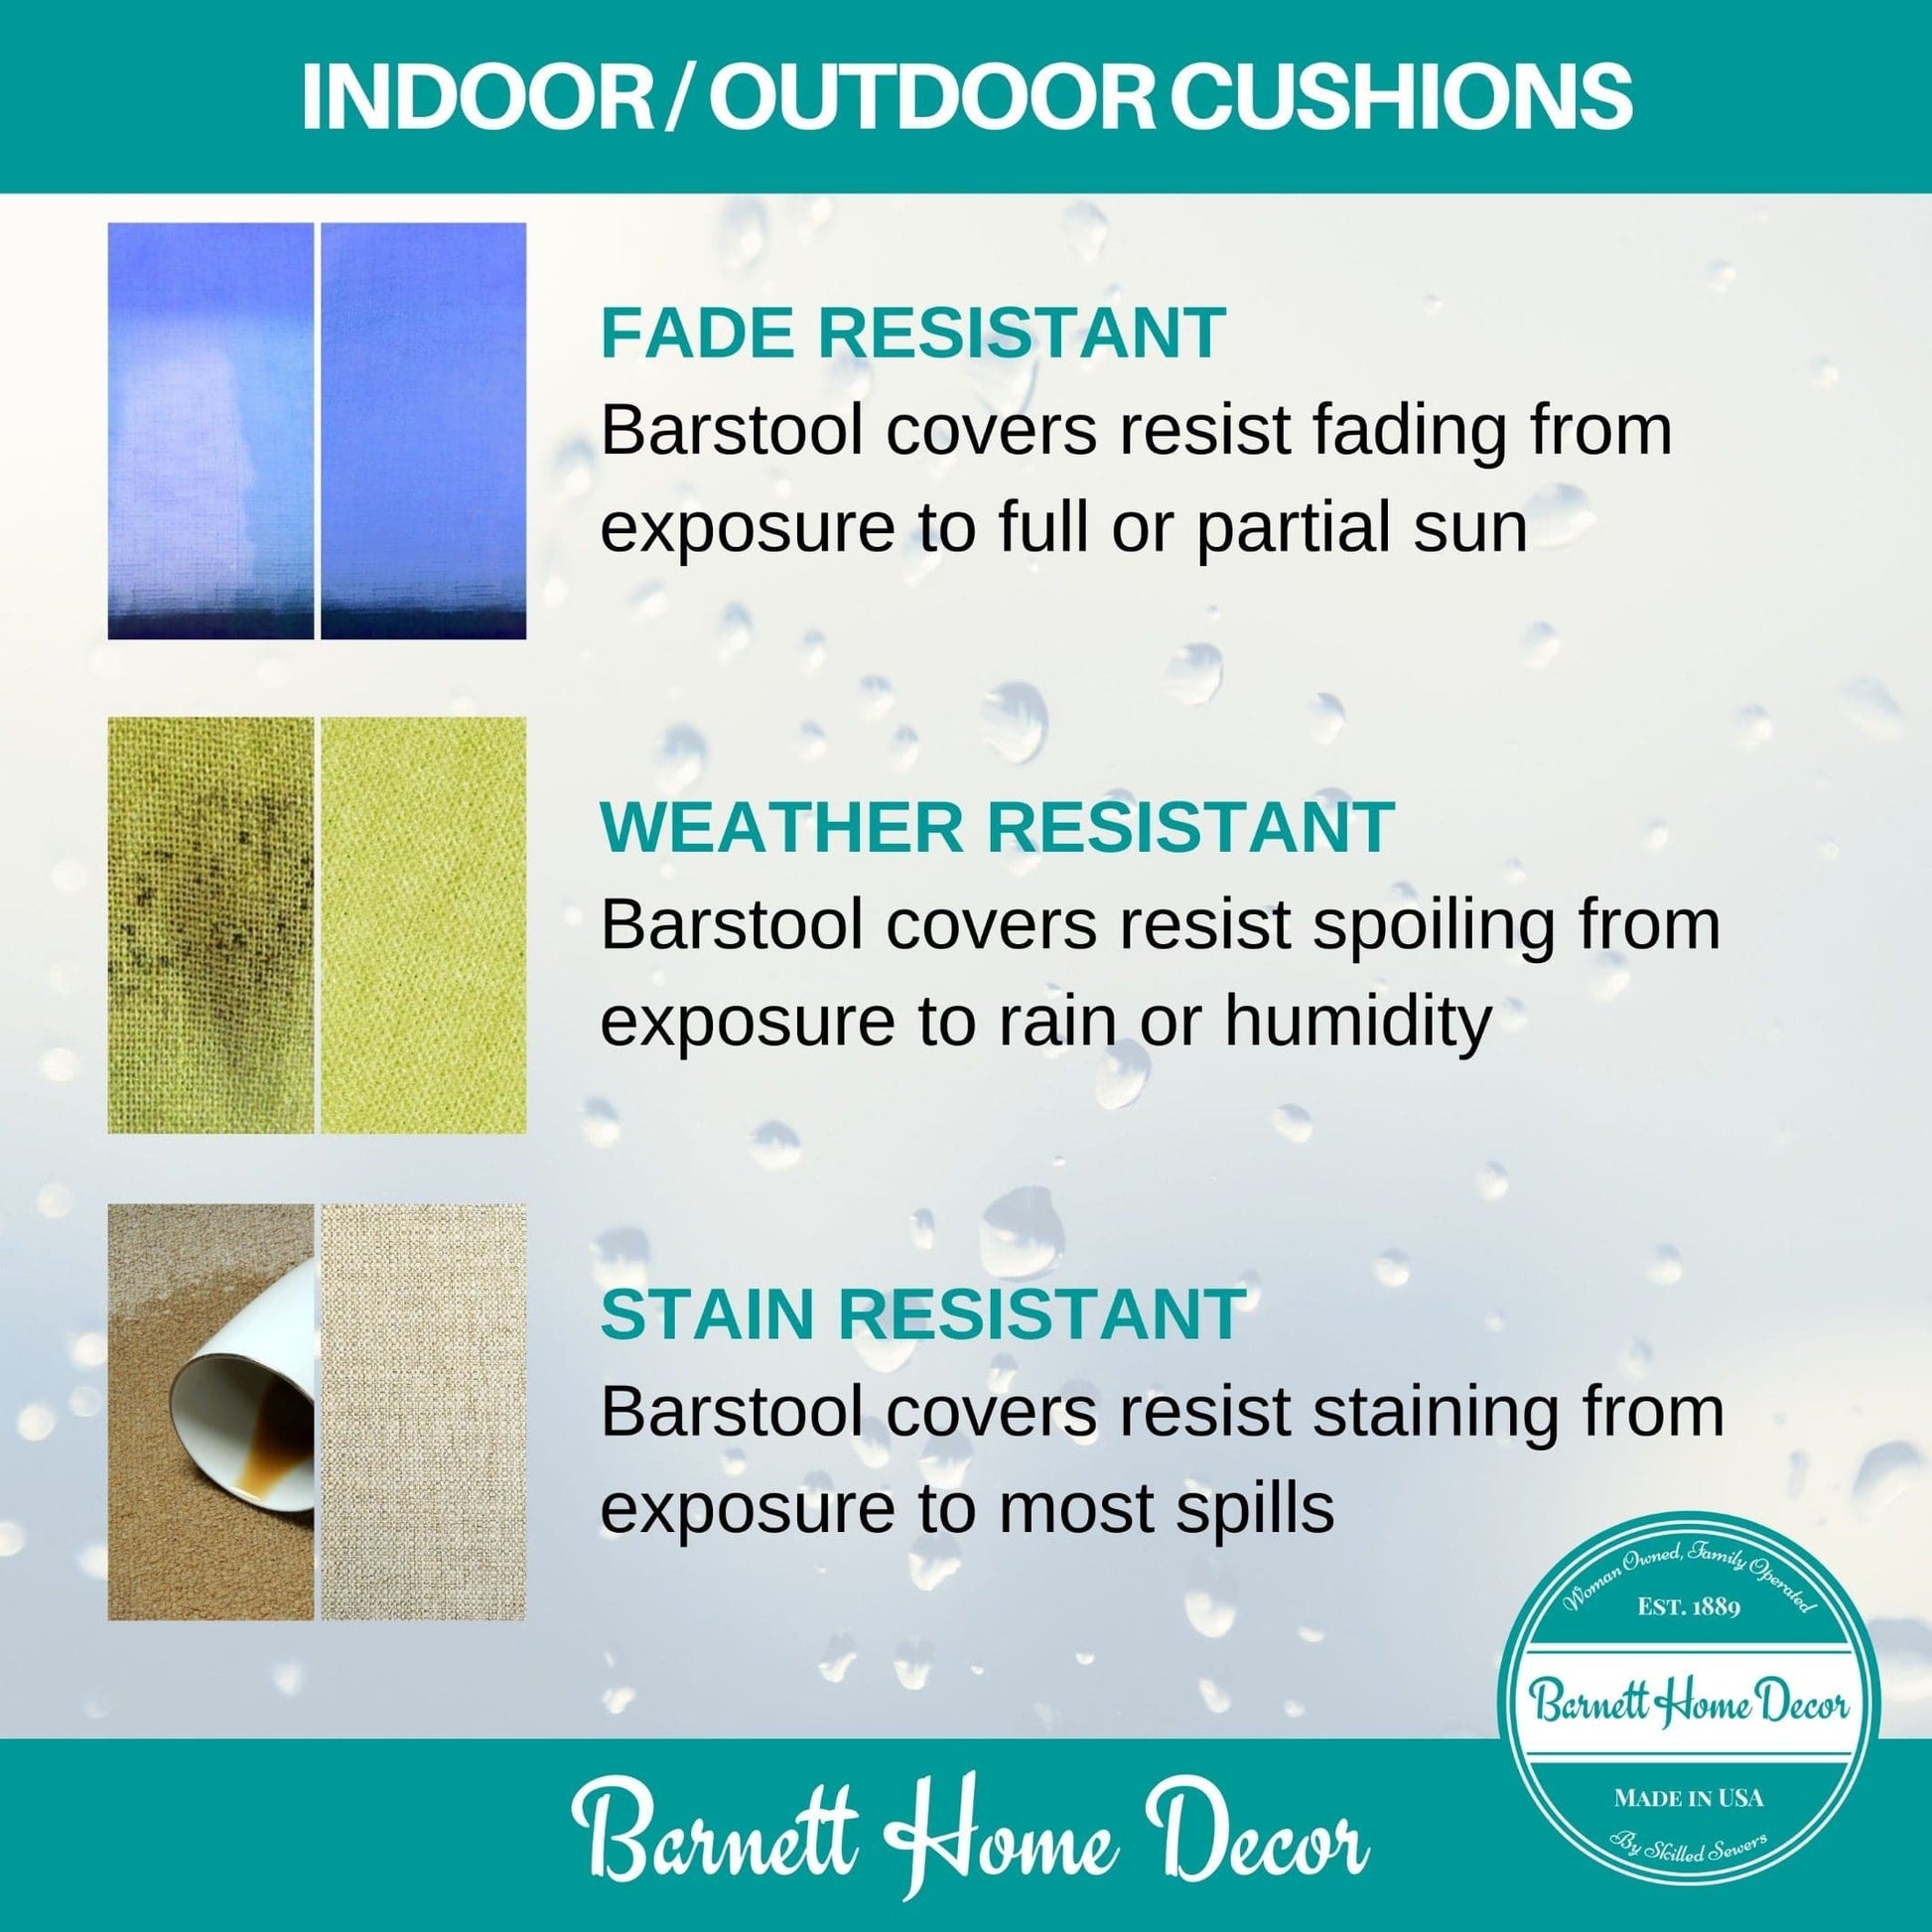 Indoor/Outdoor Cushions - Fade Resistant - Weather Resistant - Stain Resistant